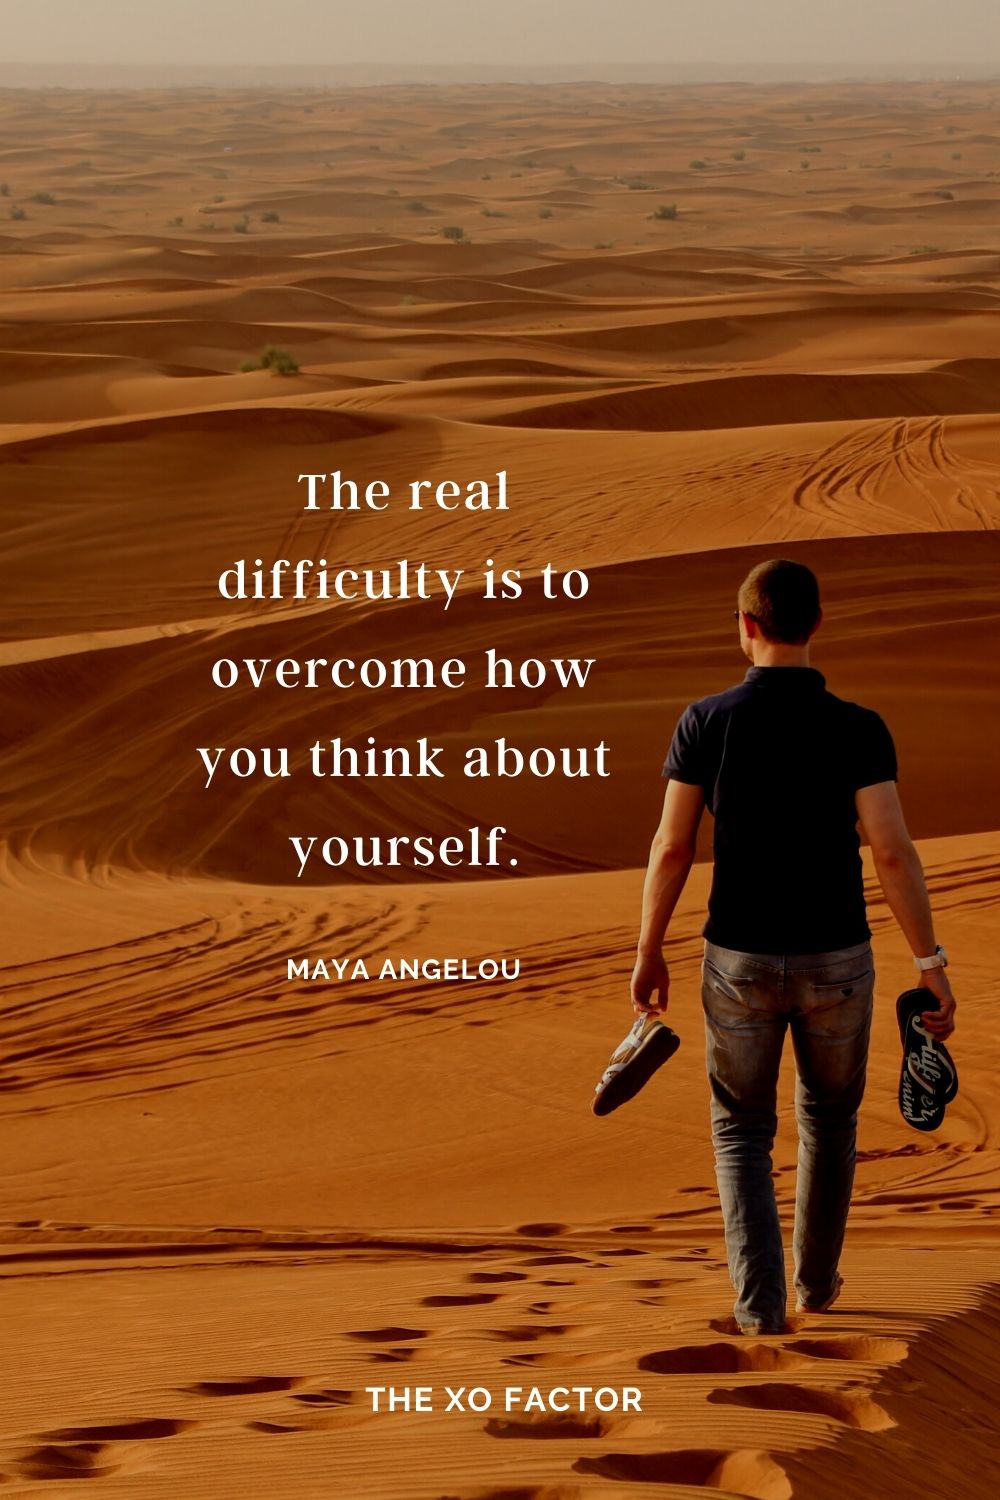 The real difficulty is to overcome how you think about yourself. Maya Angelou